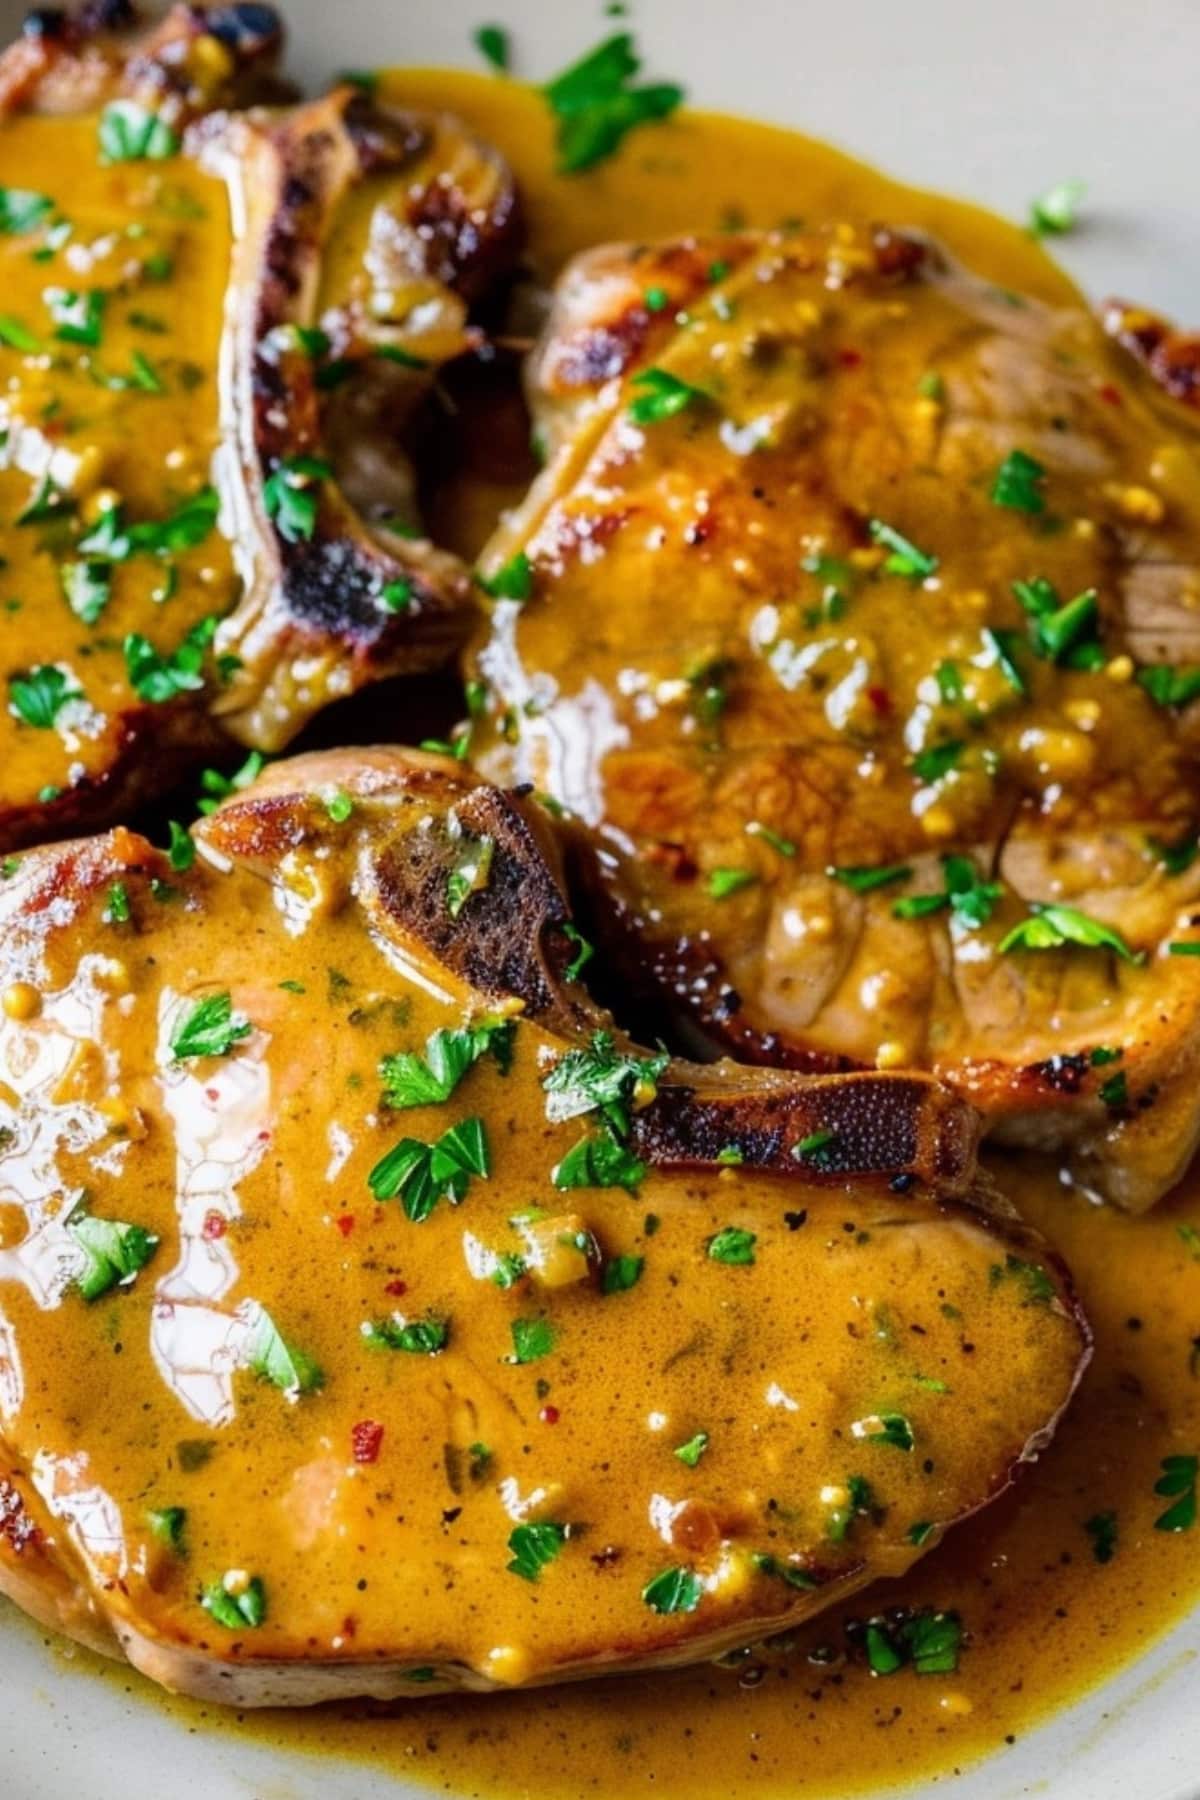 Pork chops with honey mustard sauce in a plate.